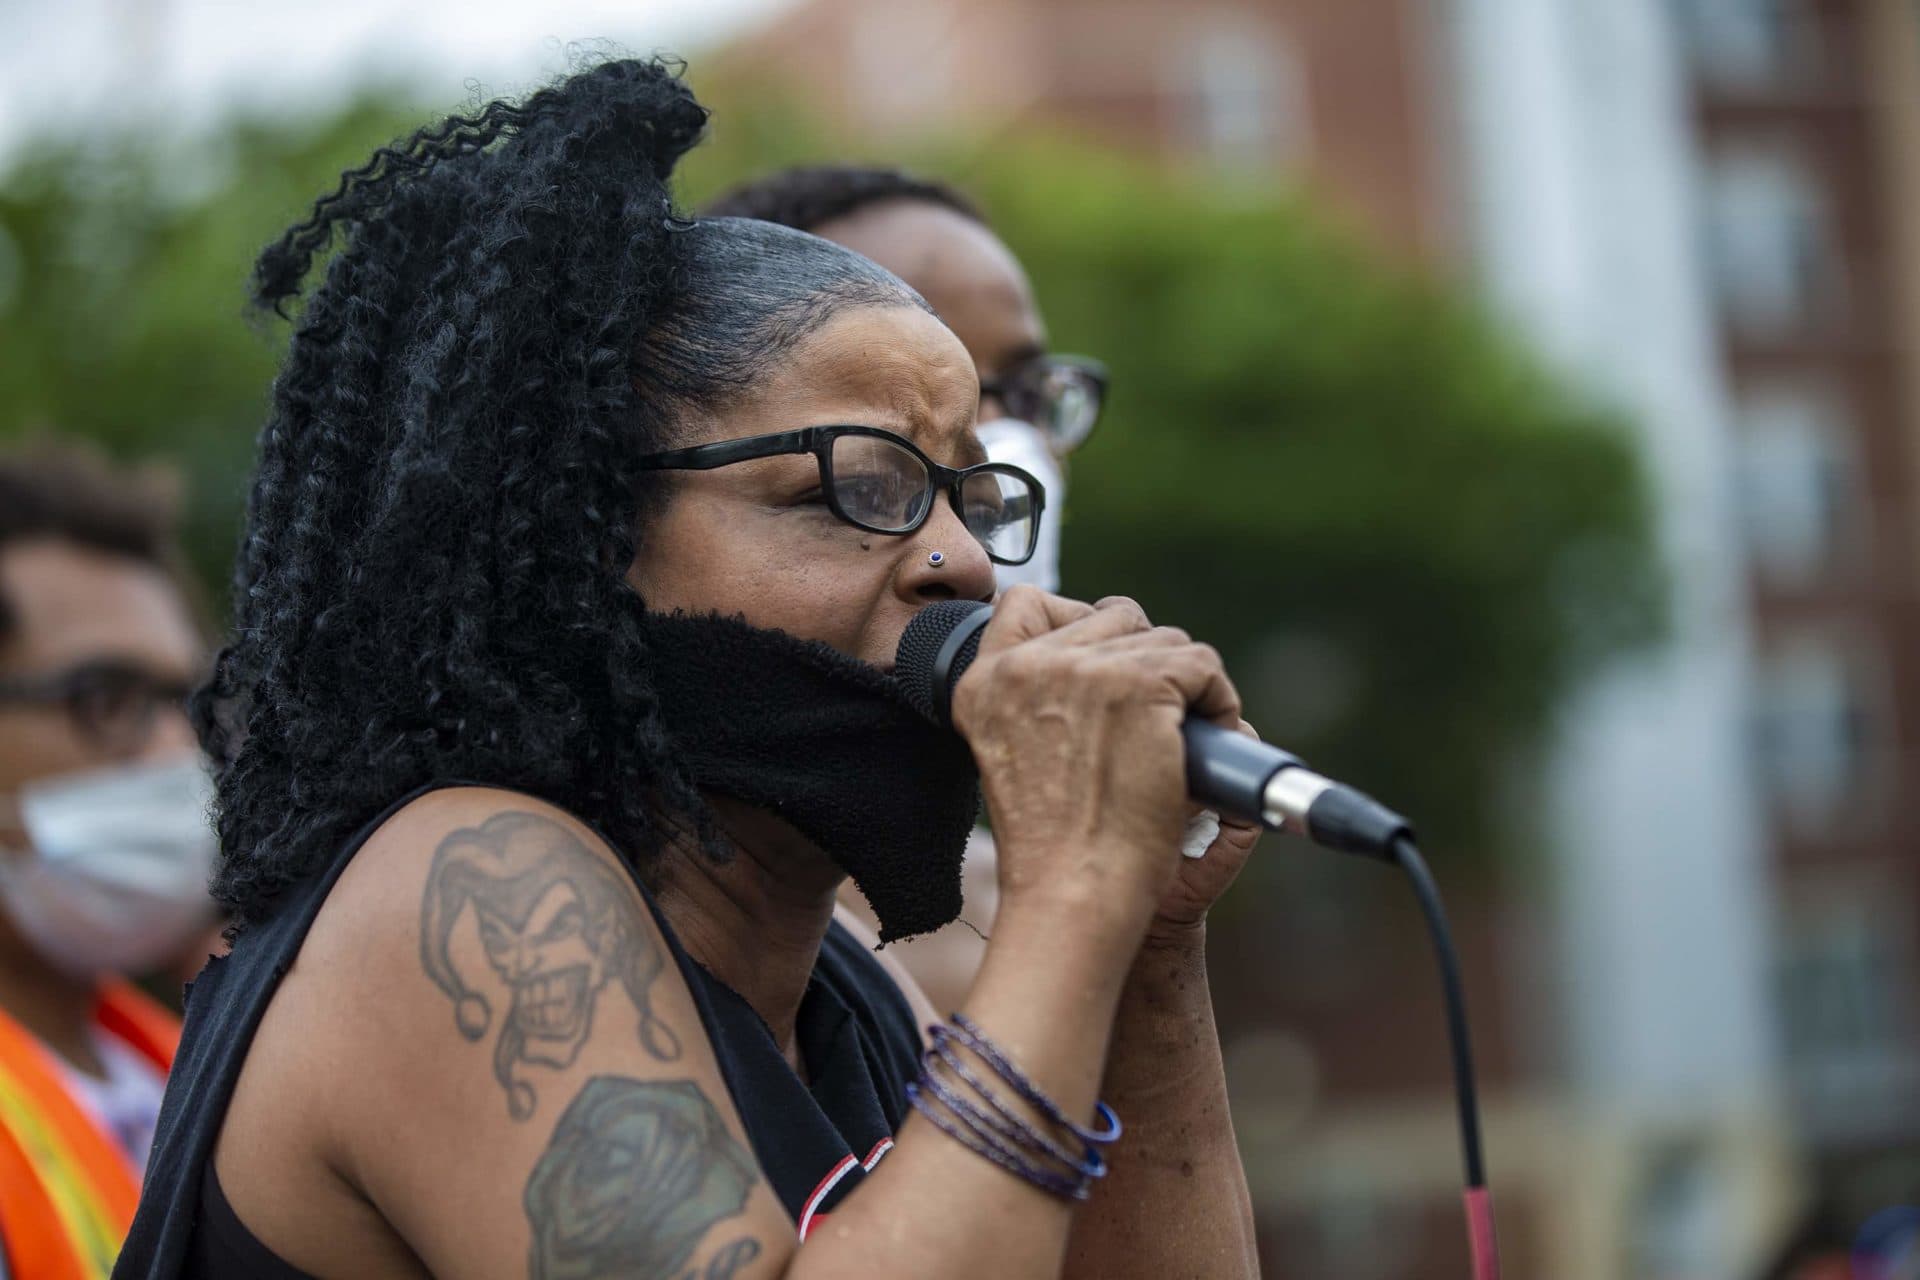 Hope Coleman, mother of Terrence Coleman, who was shot and killed by police in 2016, spoke during the rally in Peters Park. (Jesse Ciosta/WBUR)